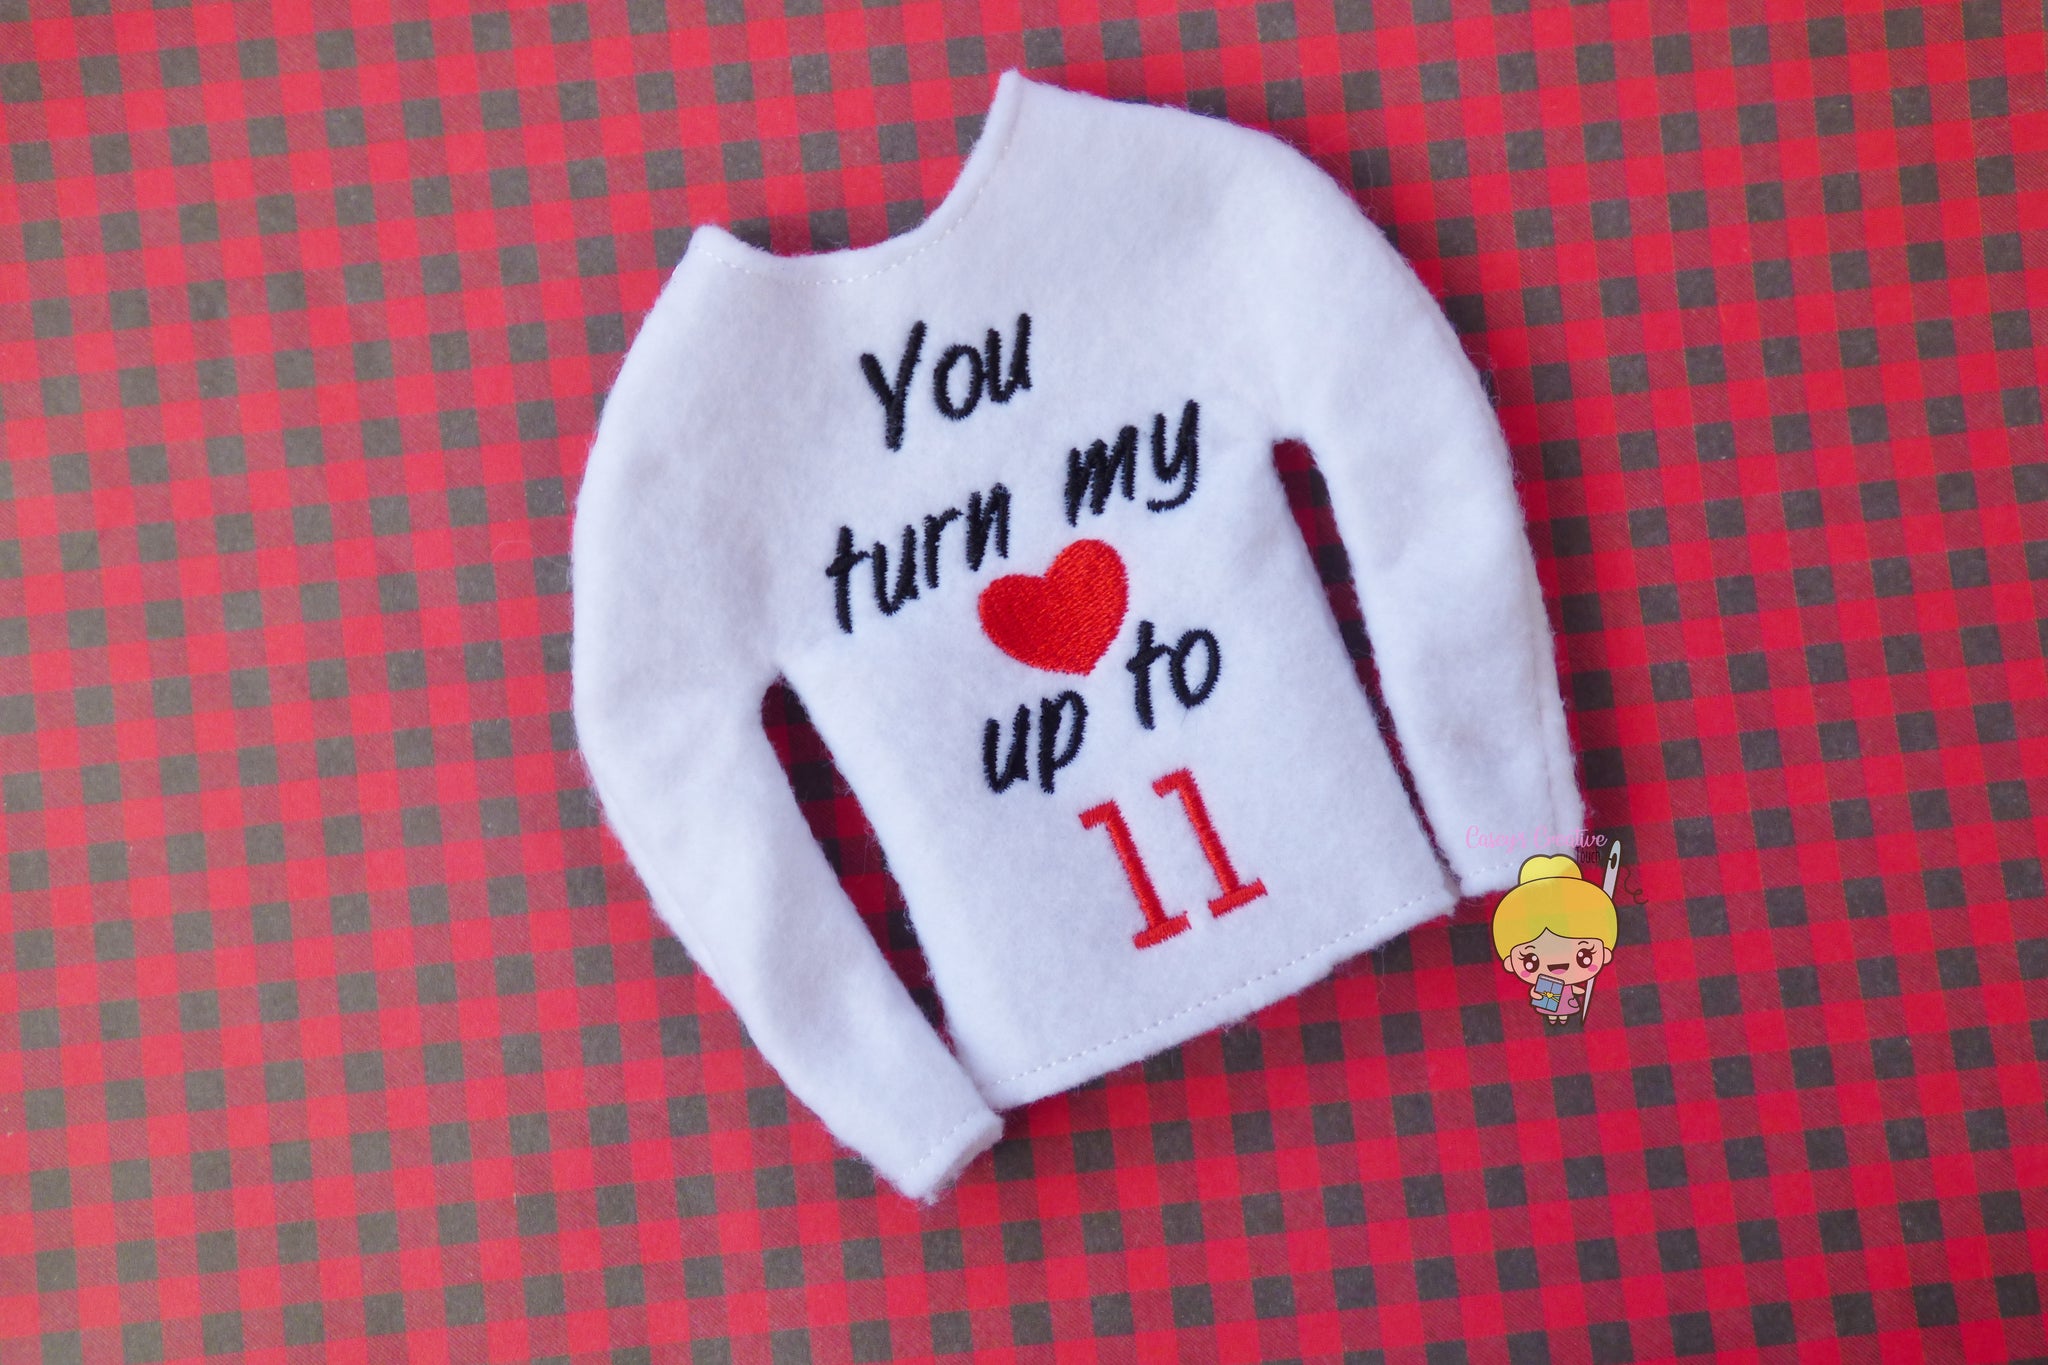 You Turn my heart  up to 11 Elf Shirt